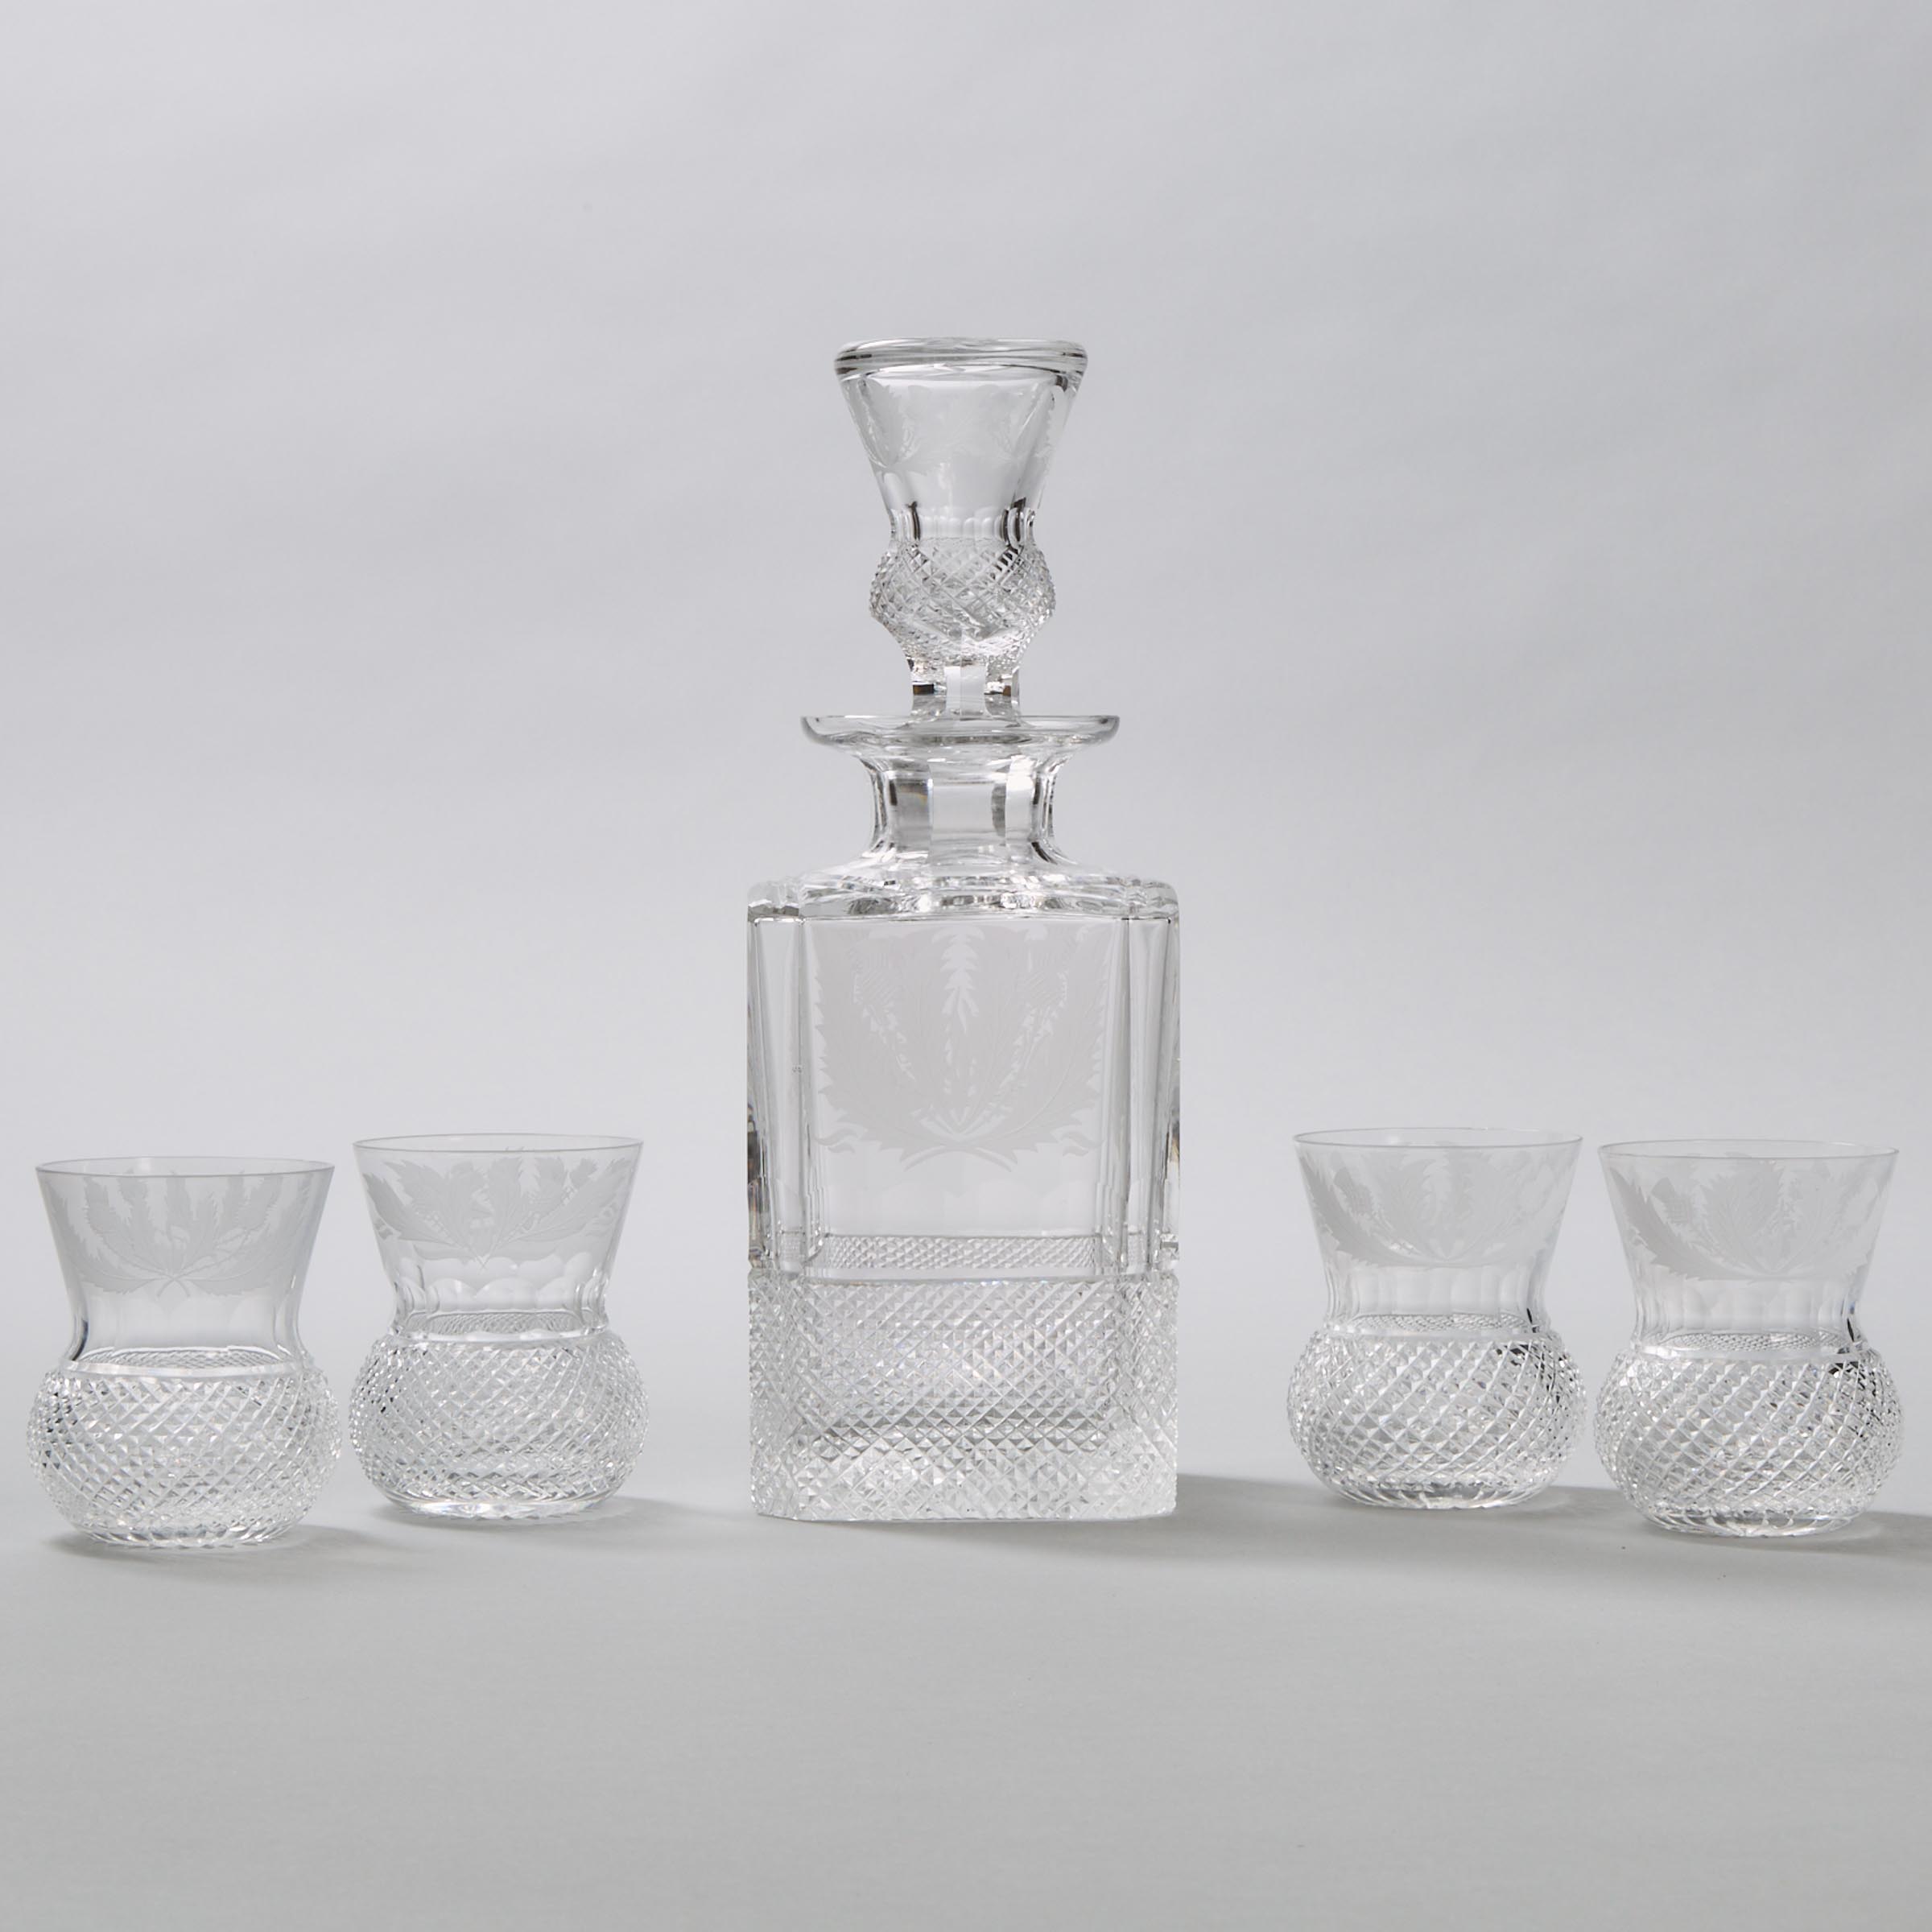 Edinburgh Crystal 'Thistle' Pattern Cut Glass Decanter and Four Tumblers, 20th century